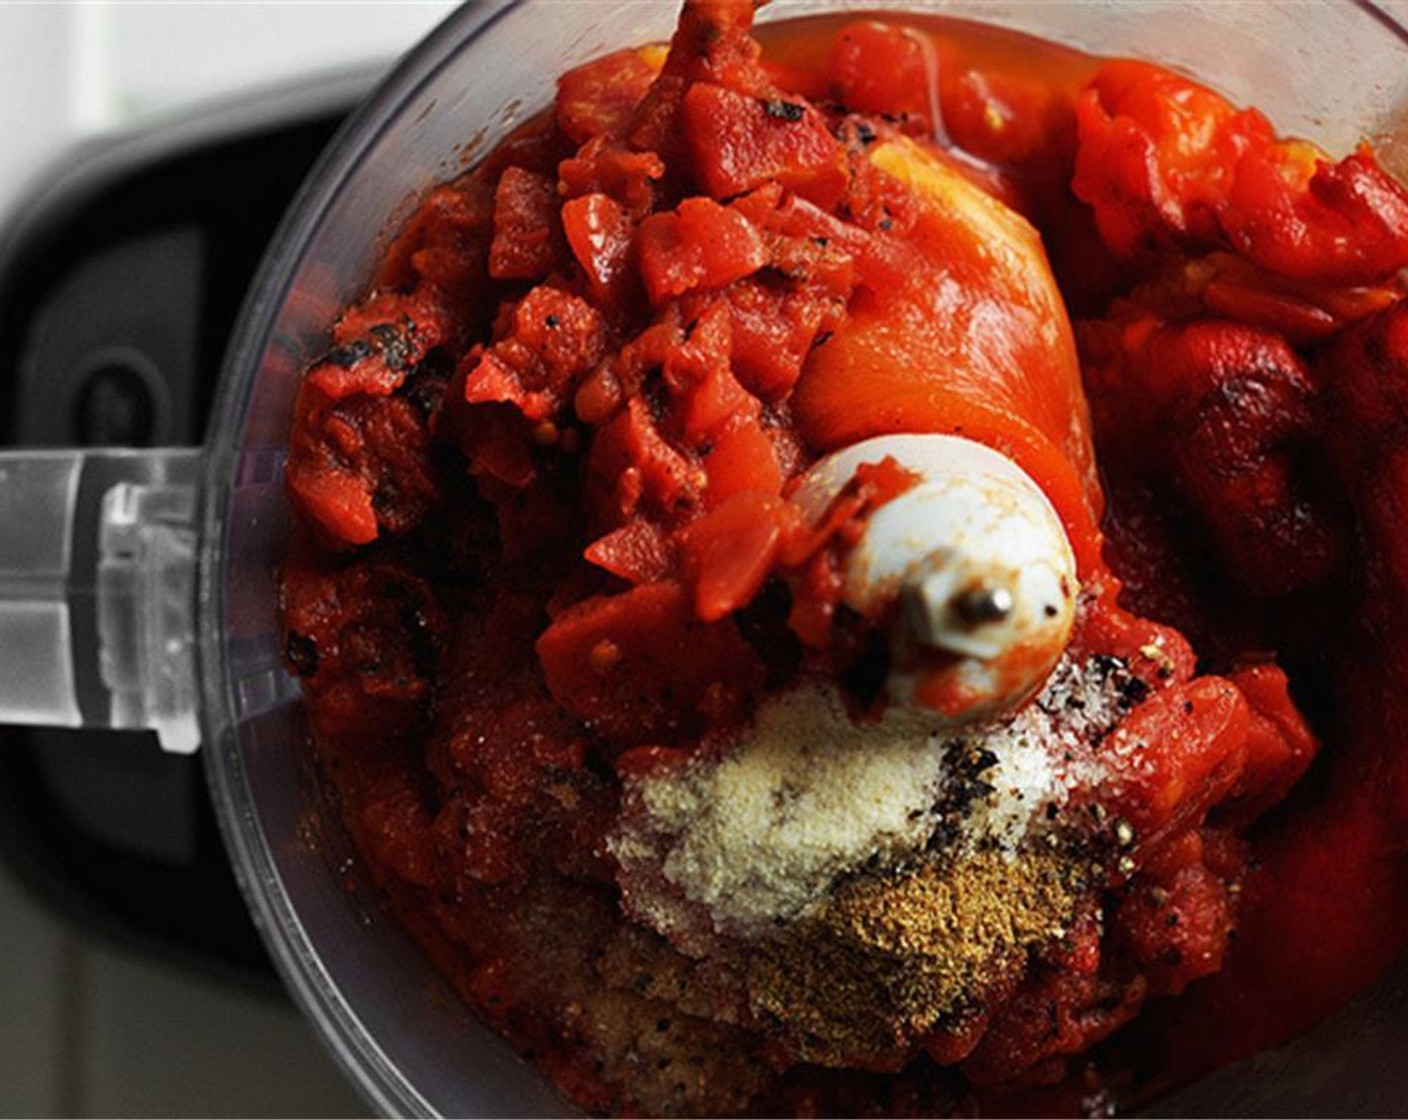 step 6 In a food processor or blender, combine the roasted peppers, Canned Fire Roasted Diced Tomatoes (1 2/3 cups), Salt (1 tsp), Freshly Ground Black Pepper (1 tsp), McCormick® Garlic Powder (1/2 tsp), and Ground Cumin (1/2 tsp).